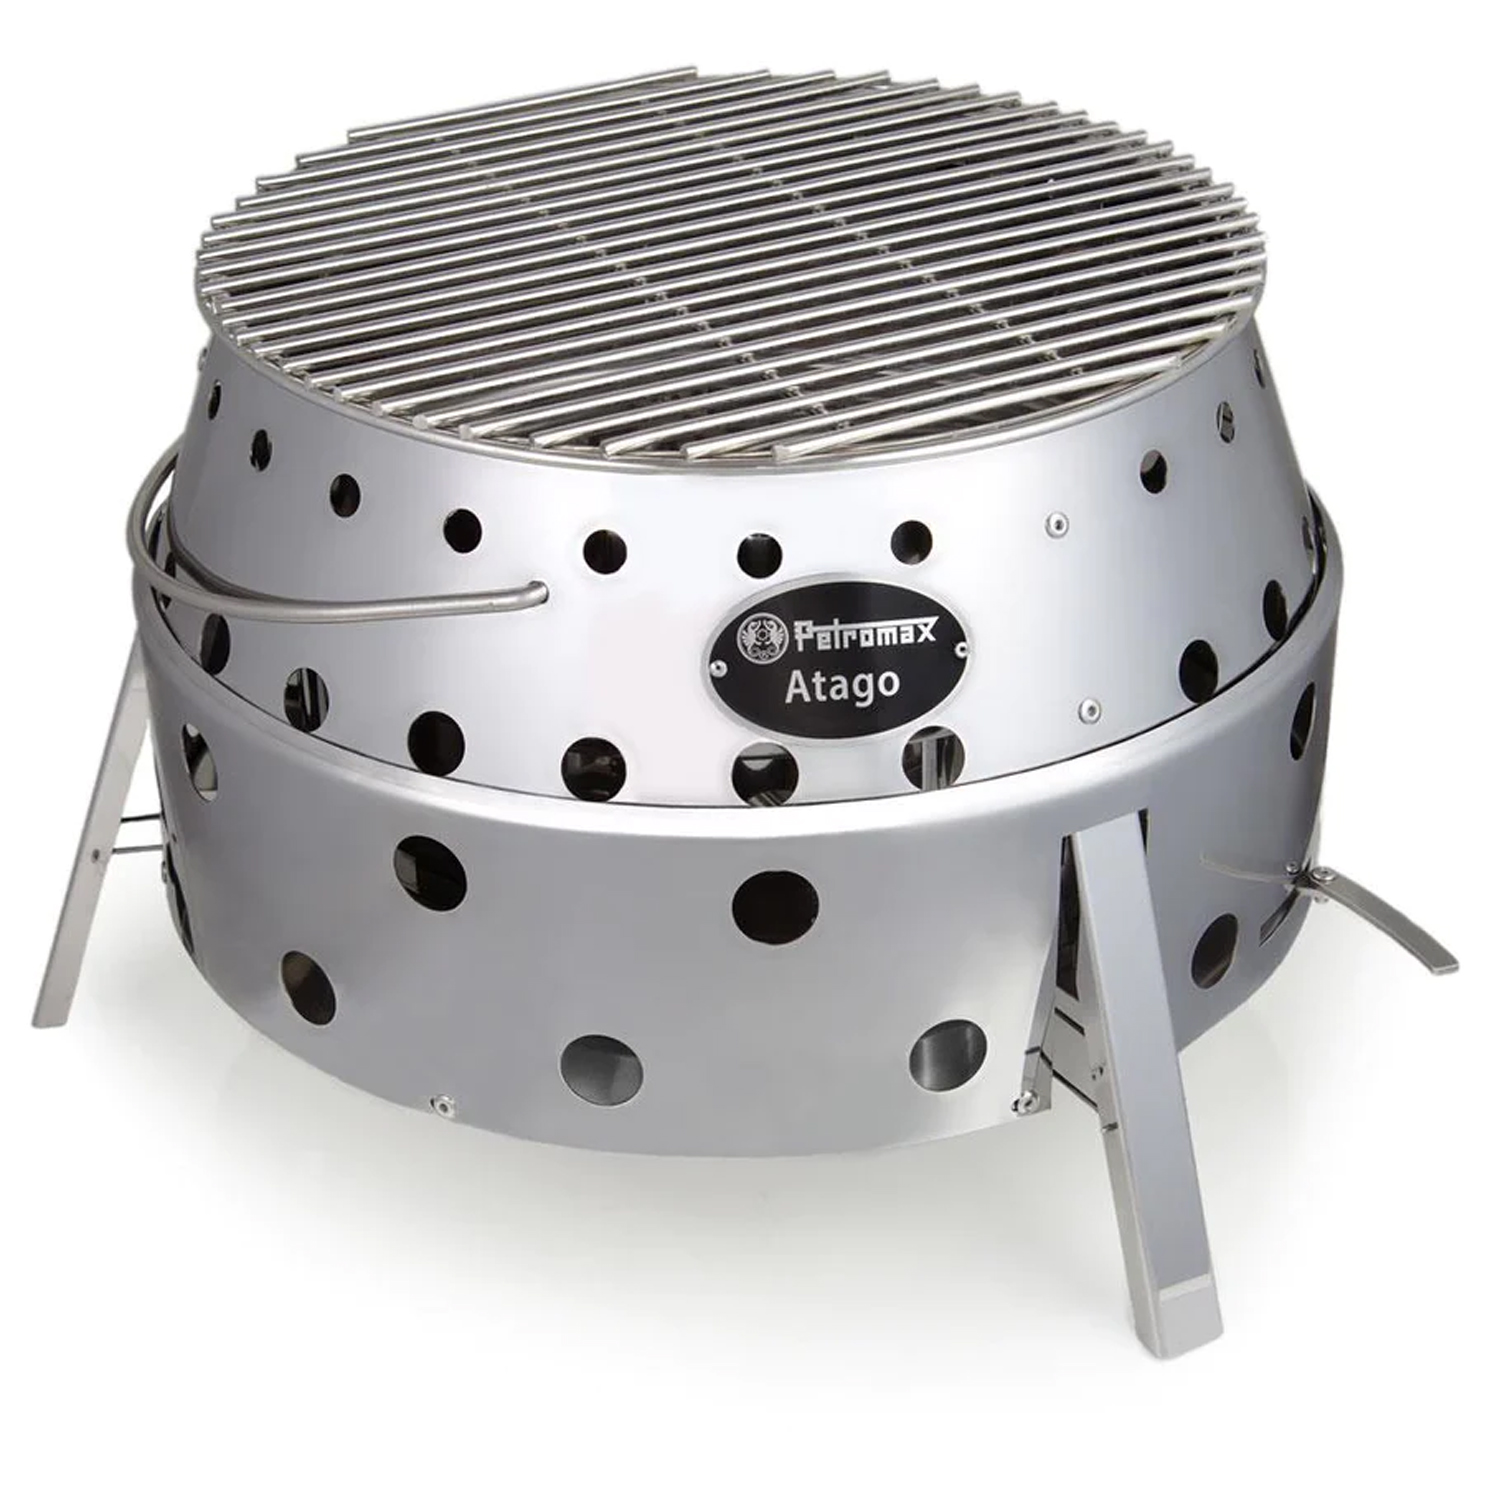 Petromax Atago Grill Stainless Steel